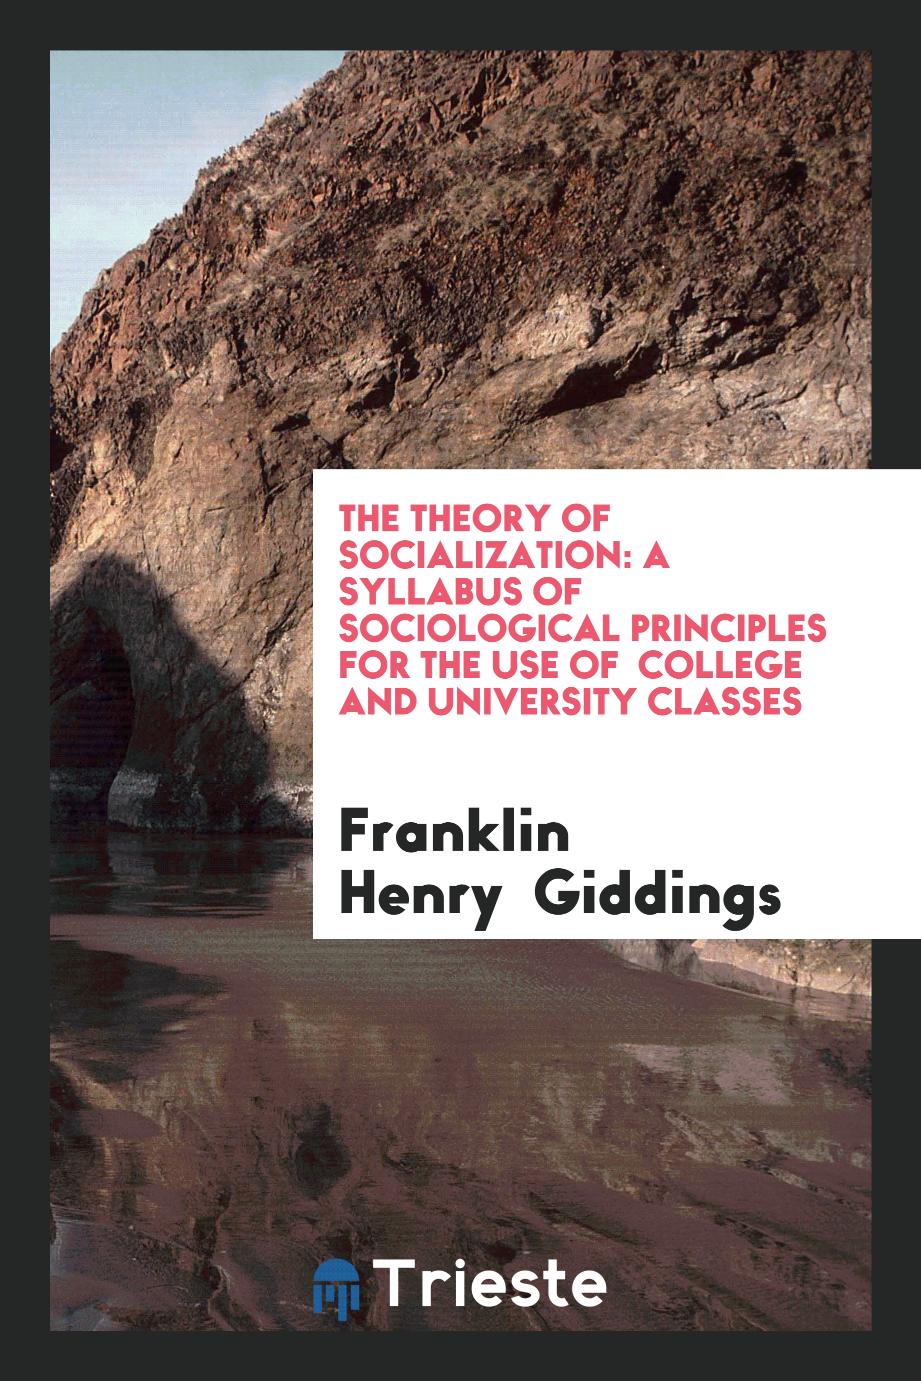 The Theory of Socialization: A Syllabus of Sociological Principles for the use of college and University classes